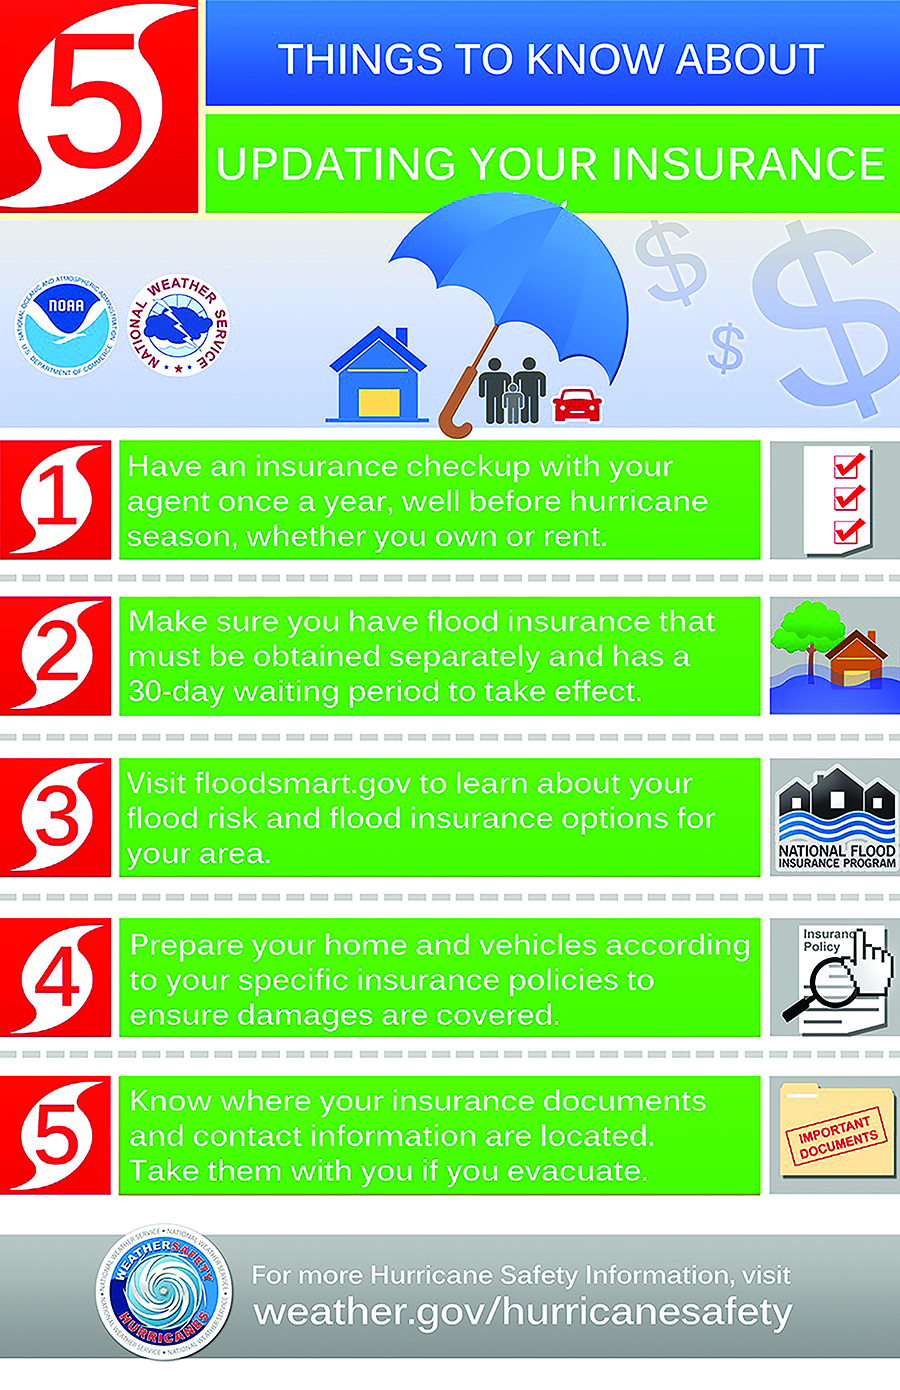 Hurricane insurance tips. To learn more, visit weather.gov/hurricanesafety.